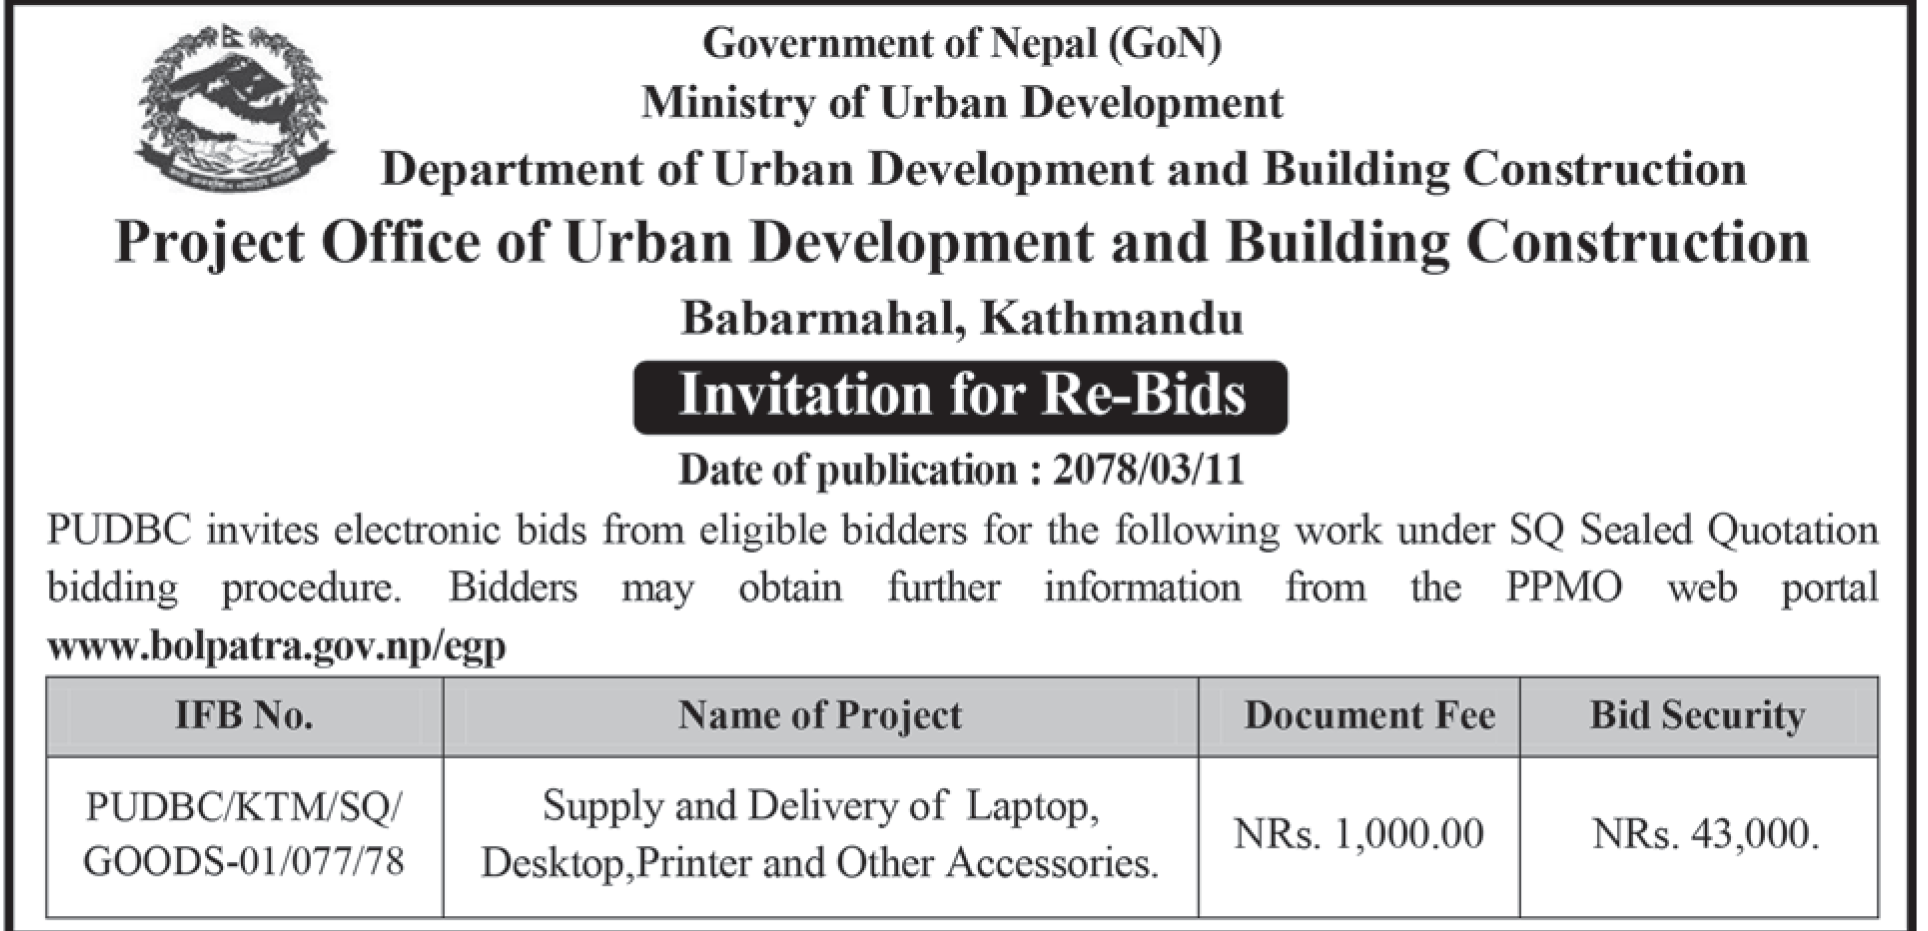 Project Office of Urban Development and Building Construction, Babarmahal announces Re-Bids  for supply and delivery of Laptop, Desktop, Printer and Other accrsseries. Image 1(5).png